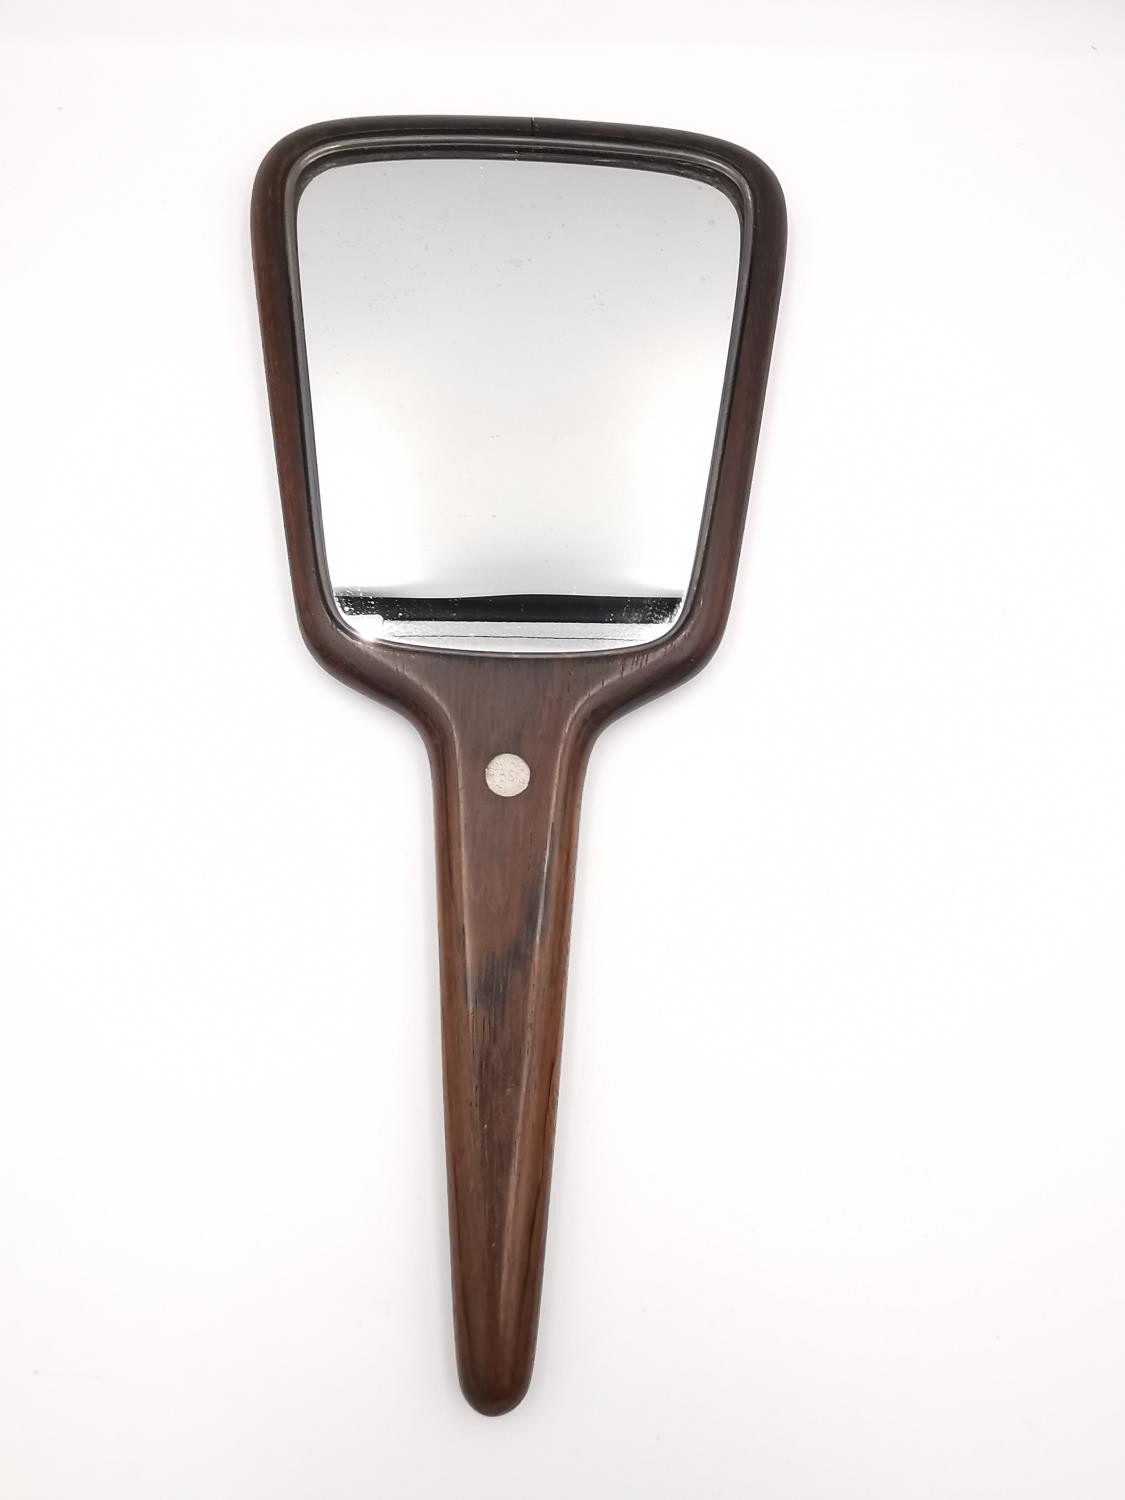 A Danish mid-century silver and rosewood brush ands mirror dressing set by designer Axel Salomonsen. - Image 4 of 11